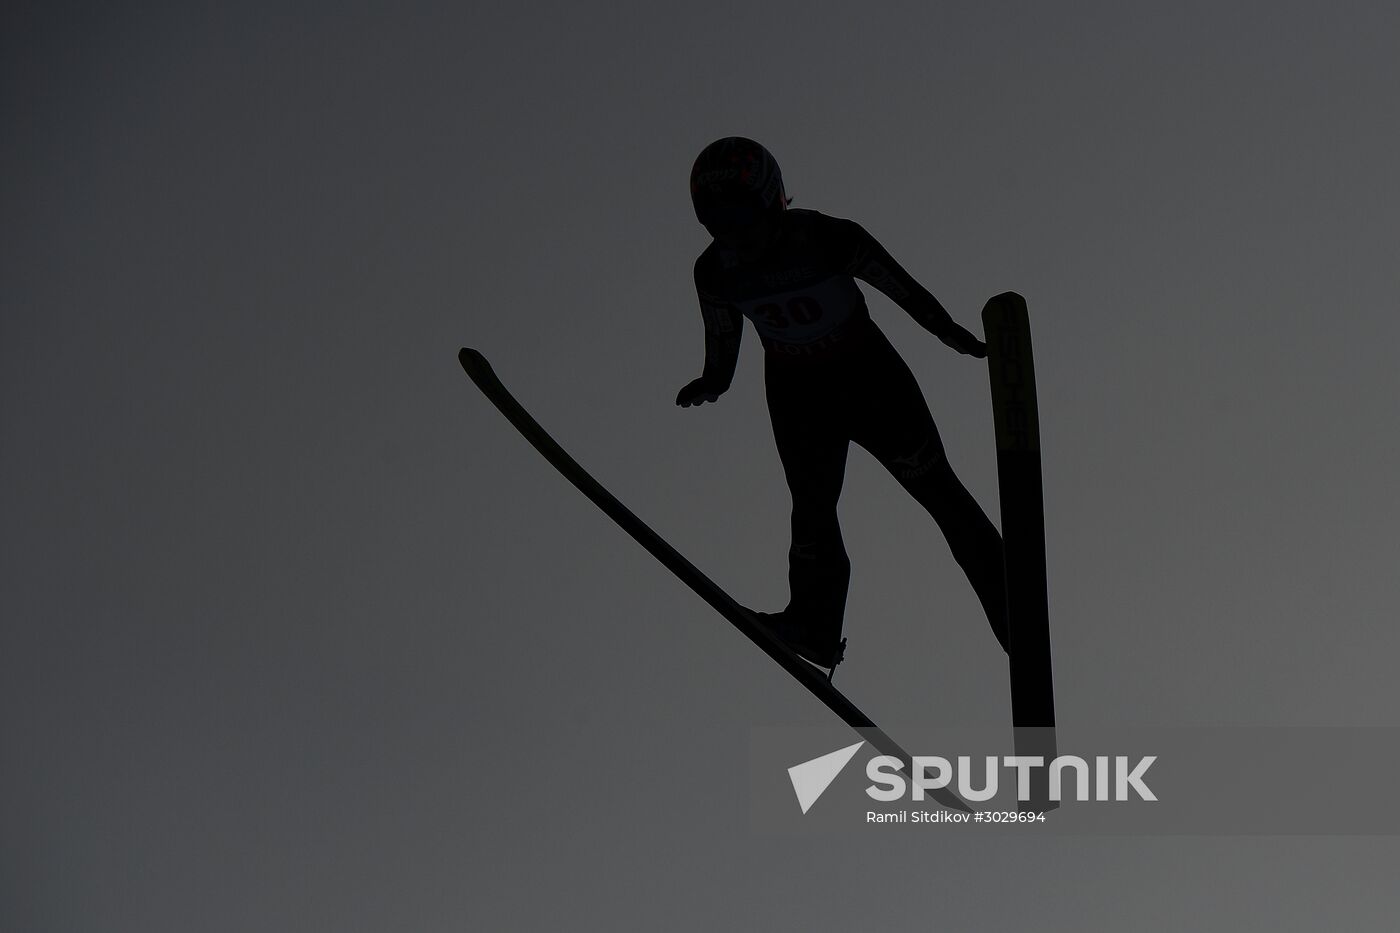 Ski jumping. World Cup stage. Women